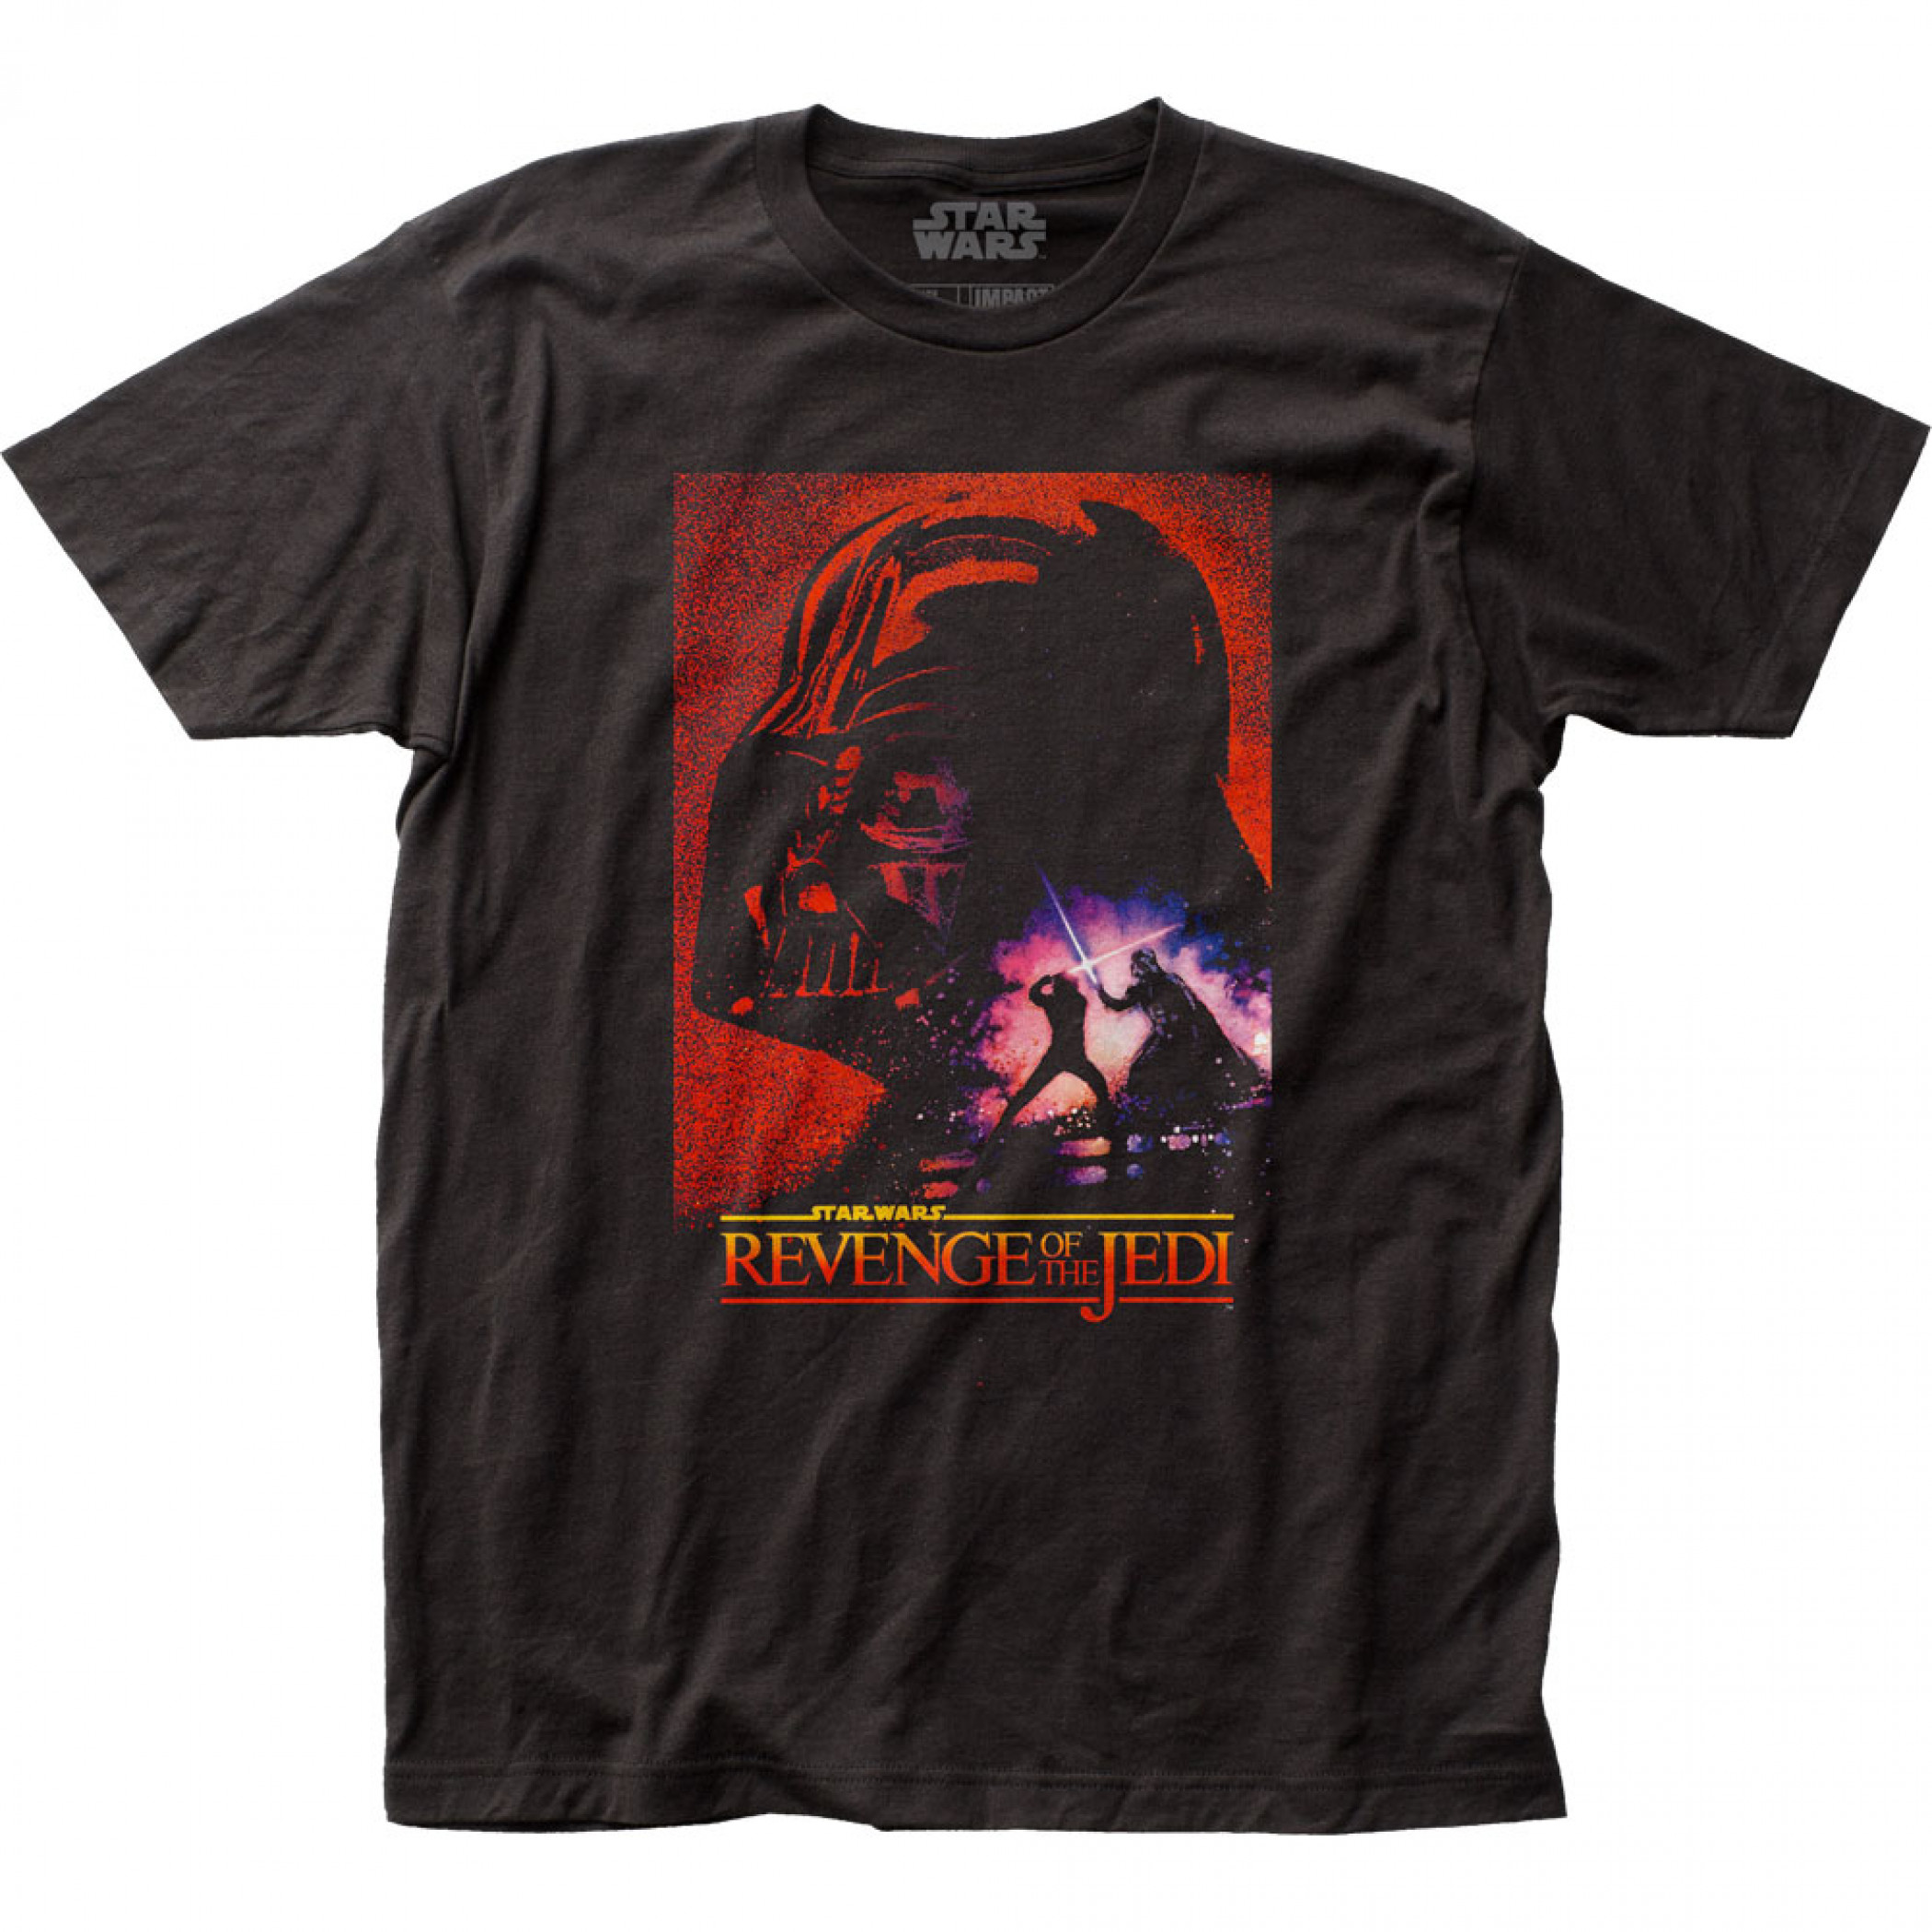 Star Wars The Revenge of the Jedi Movie Poster T-Shirt